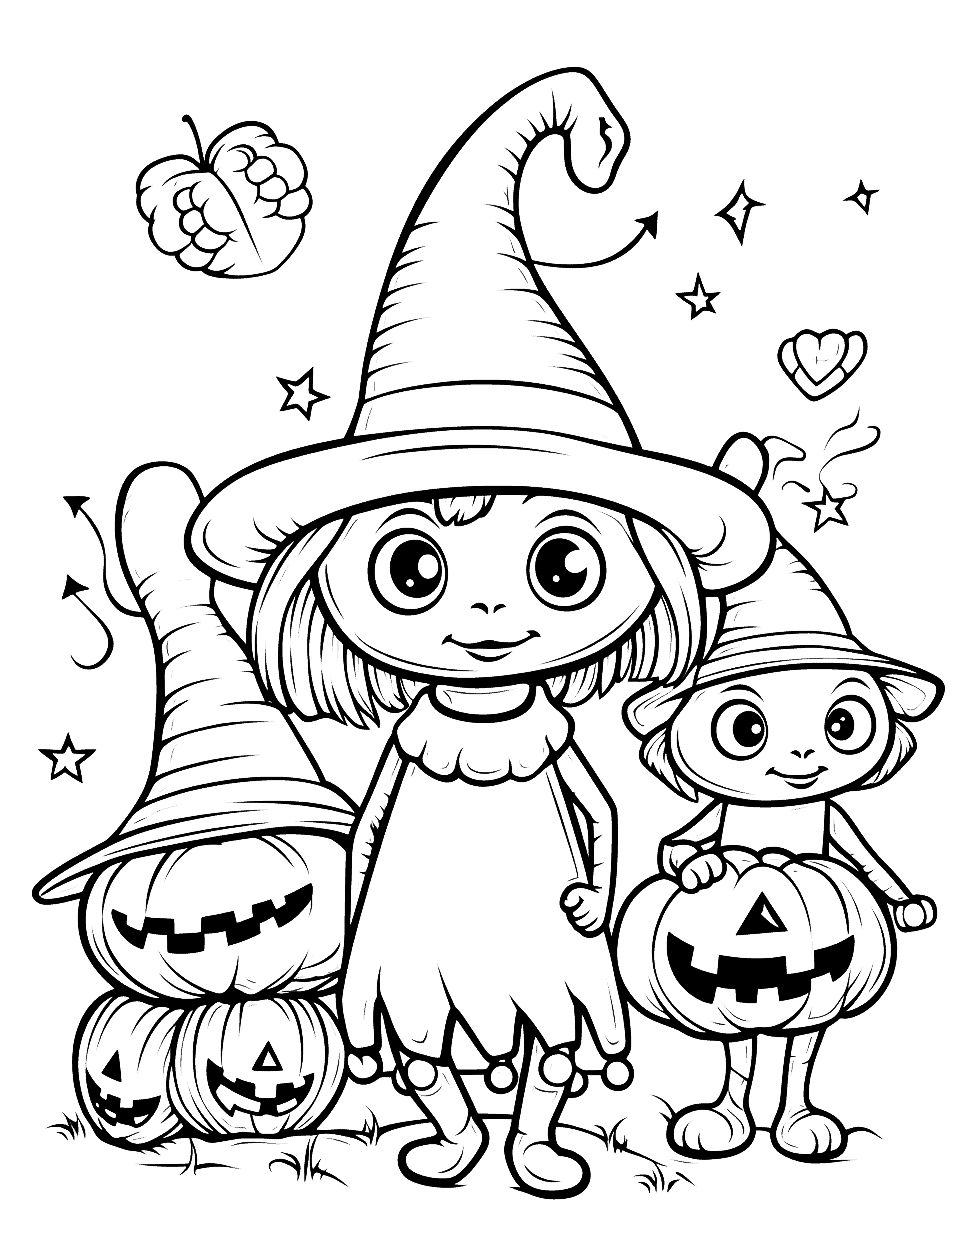 Alien Invasion Halloween Coloring Page - Cute aliens trick-or-treating in their own fun costumes.